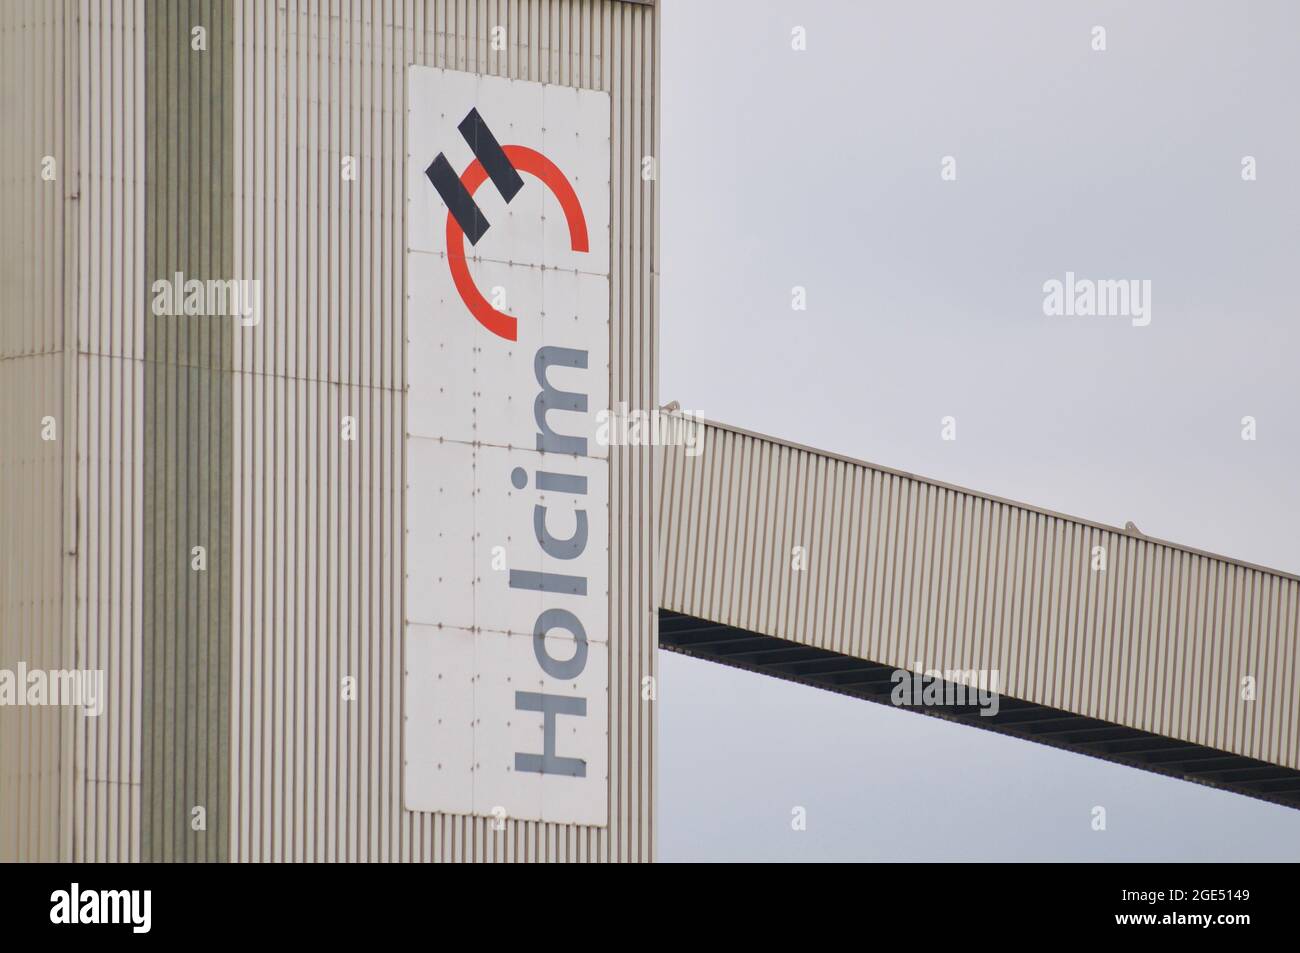 Siggenthal, Aargau, Switzerland - 18th April 2021 : Holcim company sign hanging in front of a building in Switzerlad. Holcim is a Swiss-based global b Stock Photo